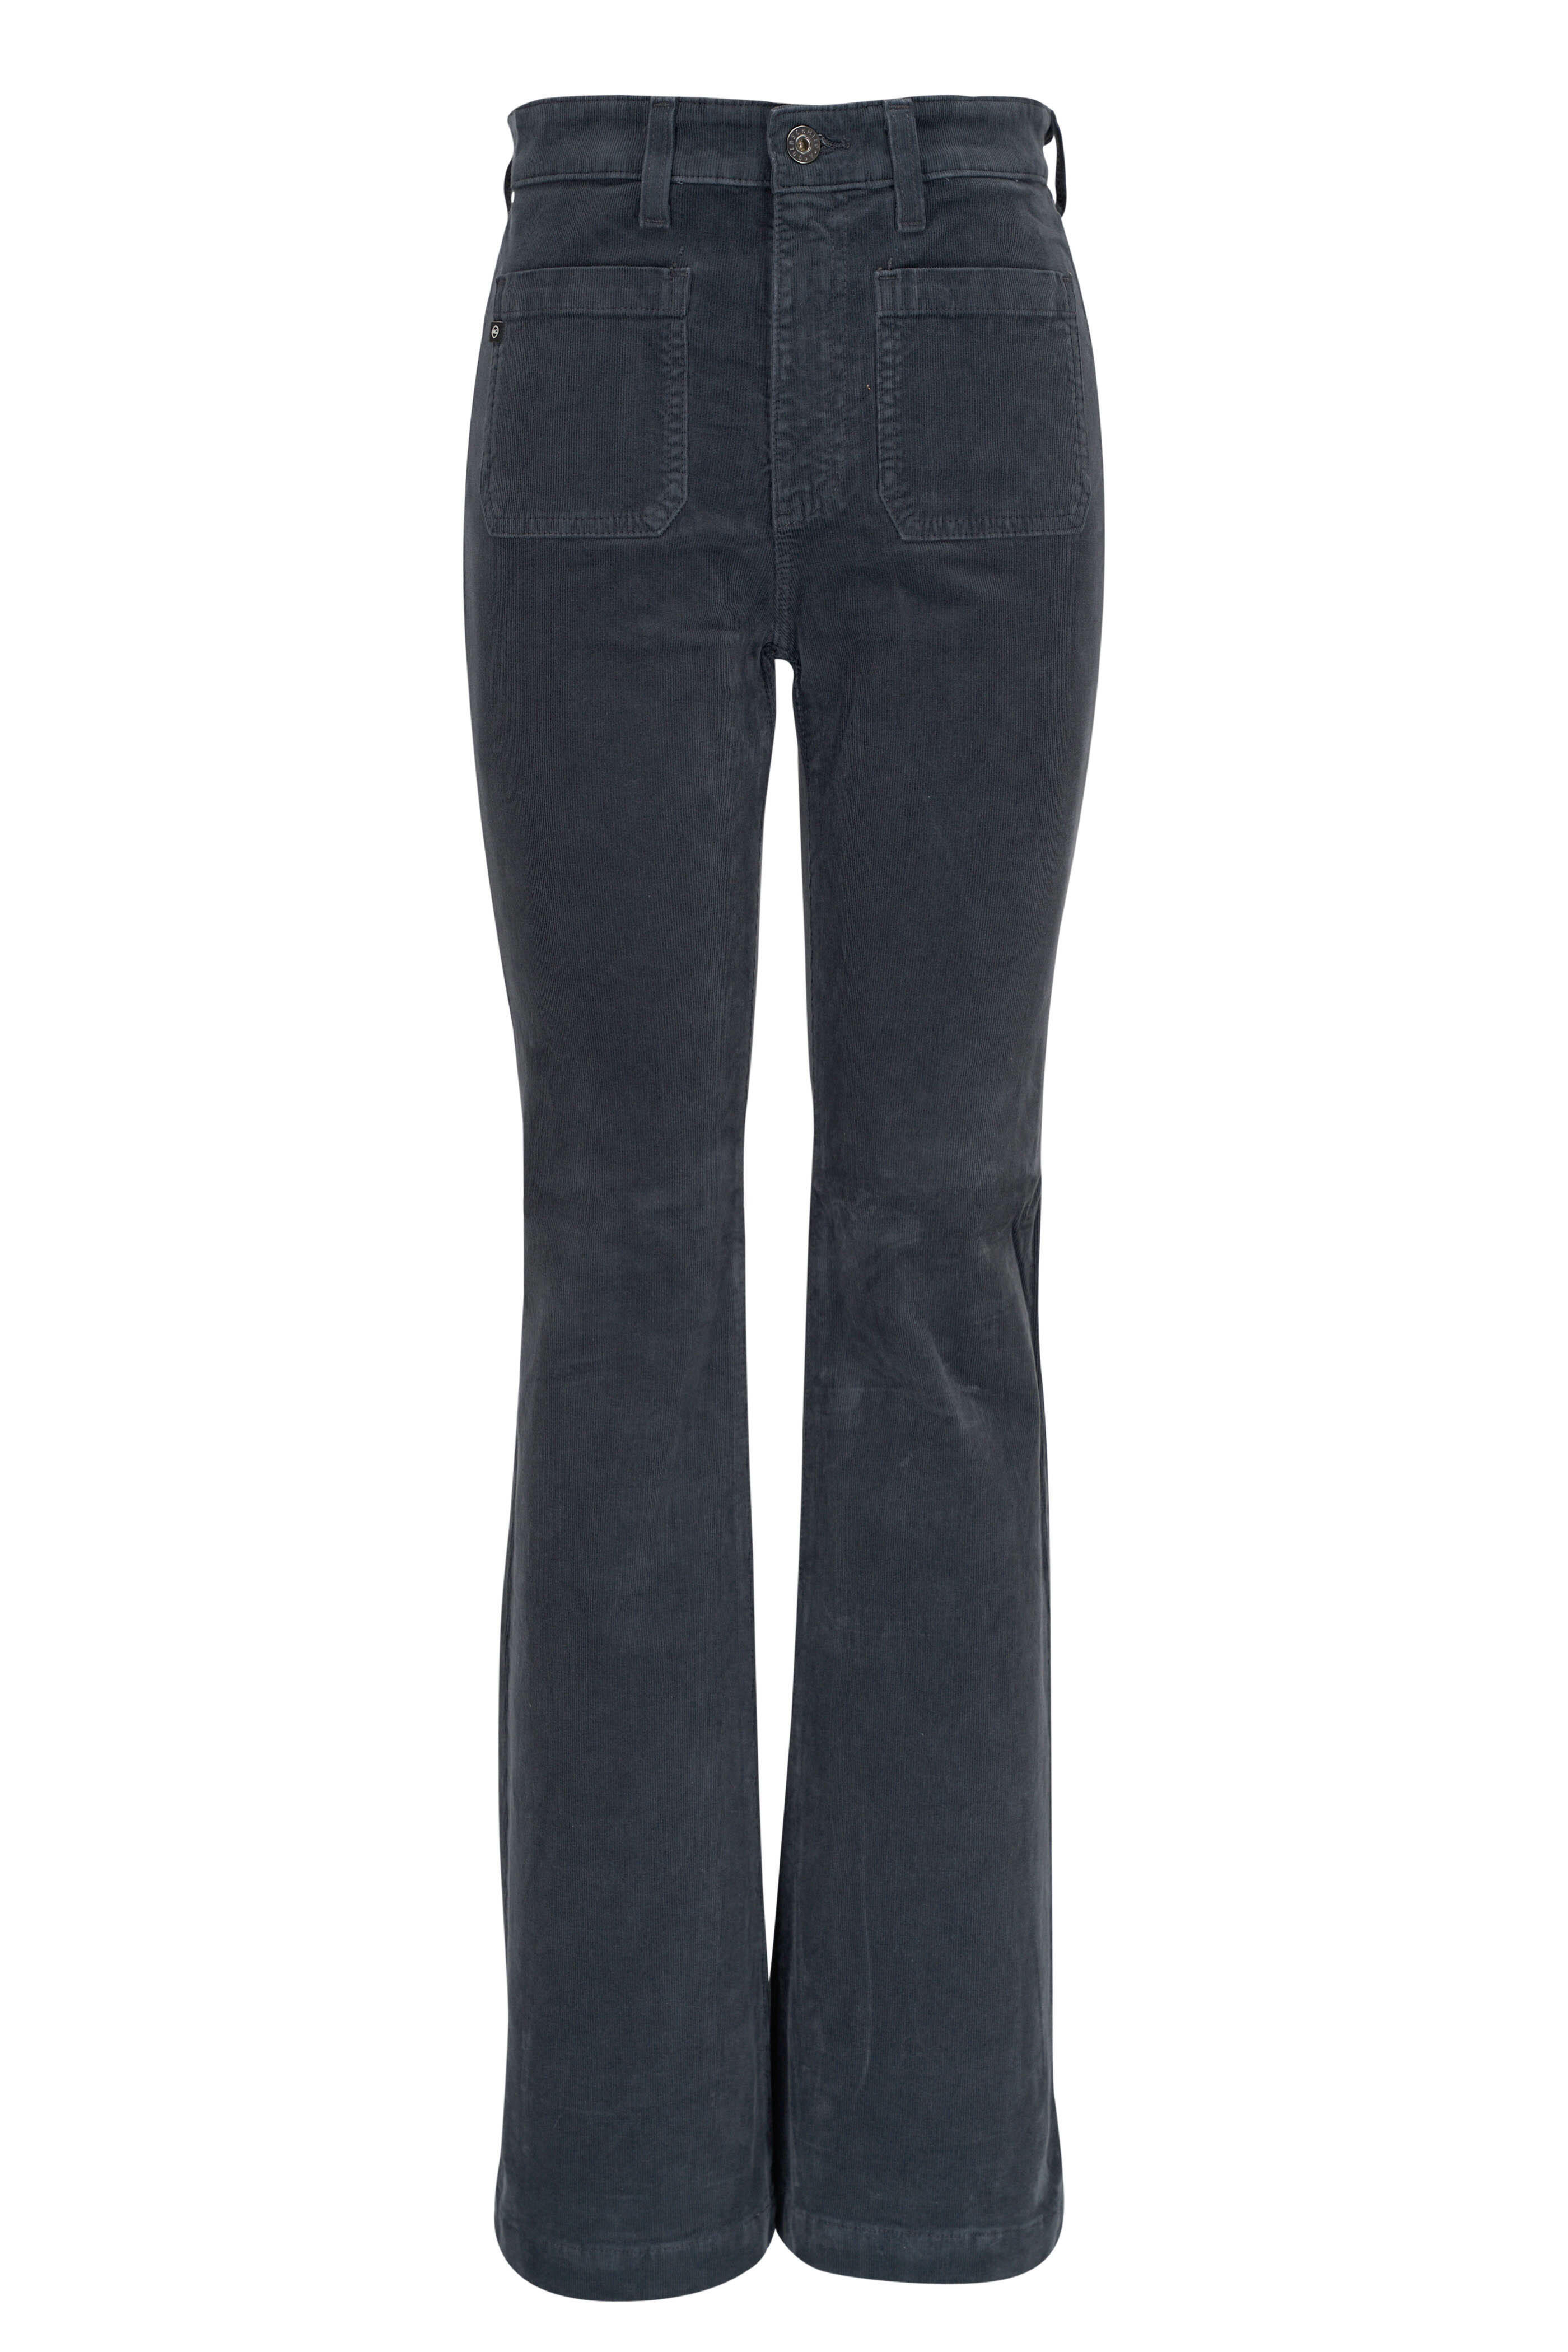 AG - Anisten Corduroy Flare Stores Jean | Mitchell Bootcut